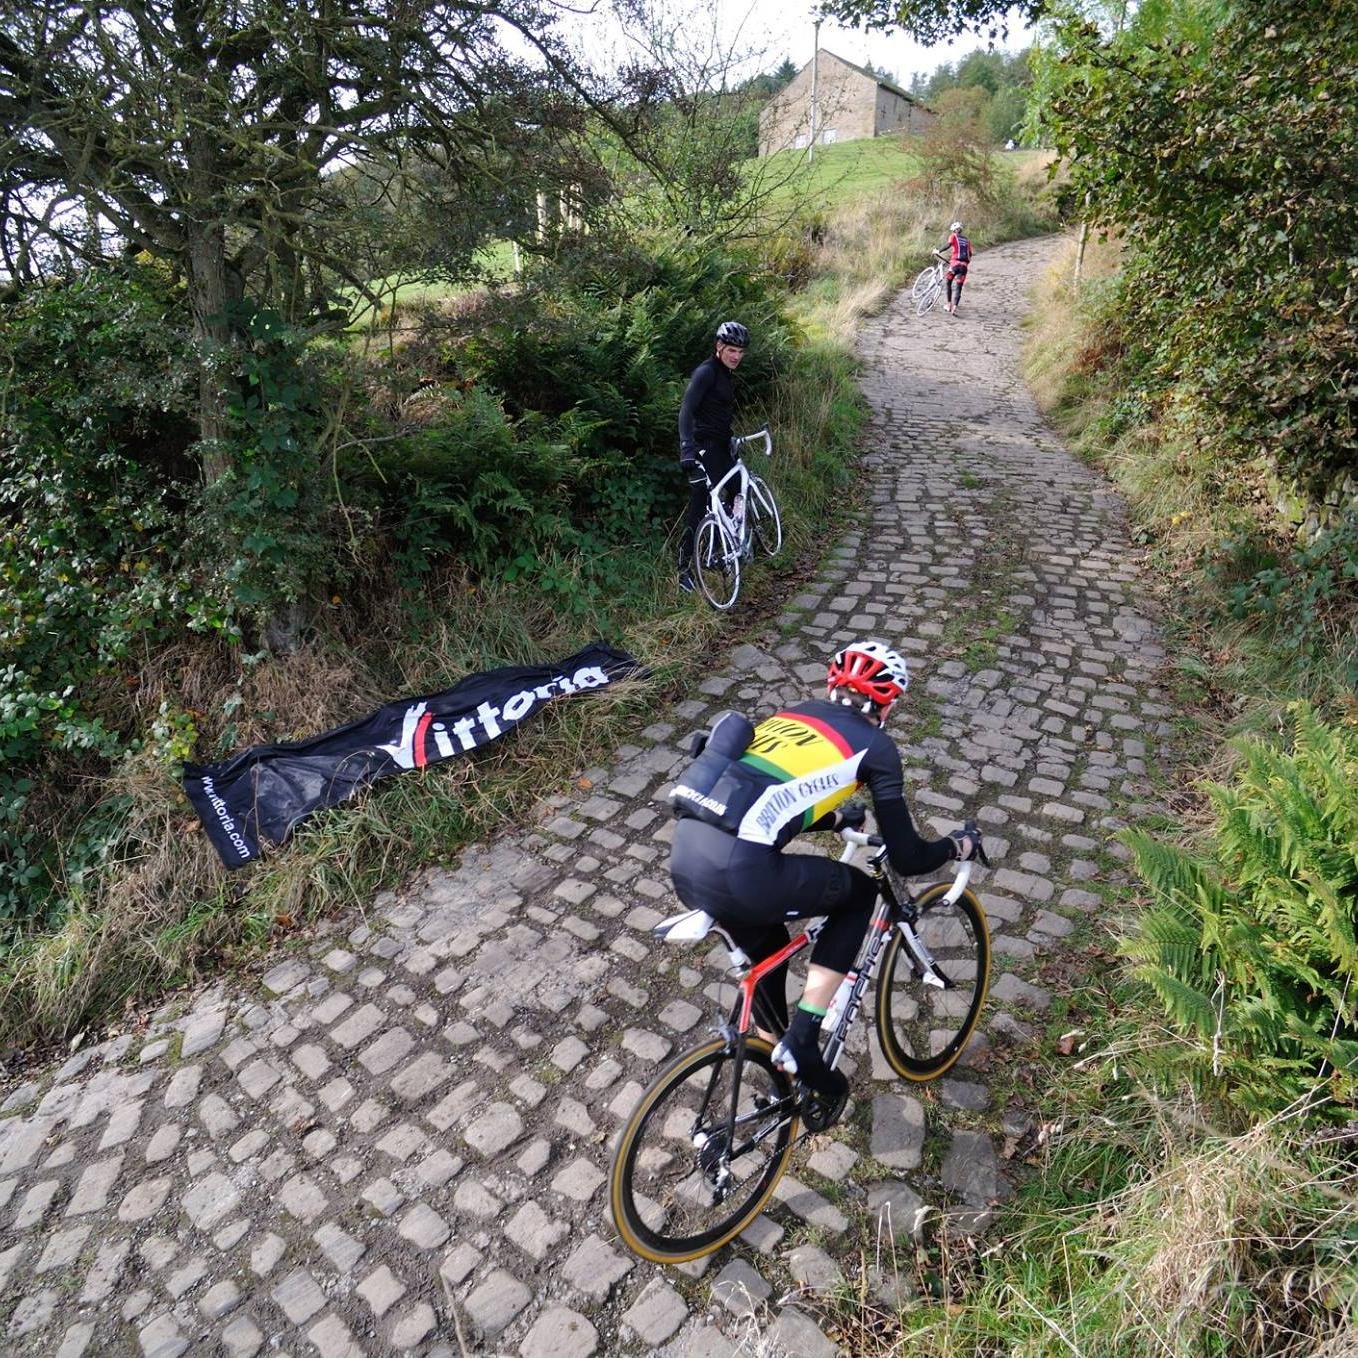 The Lapierre Cheshire Cobbled Classic is a 105km sportive inspired by the Tour of Flanders. Steep cobbled climbs, incl. 45% max. 'Corkscrew'. Sun 7 Jun 2015